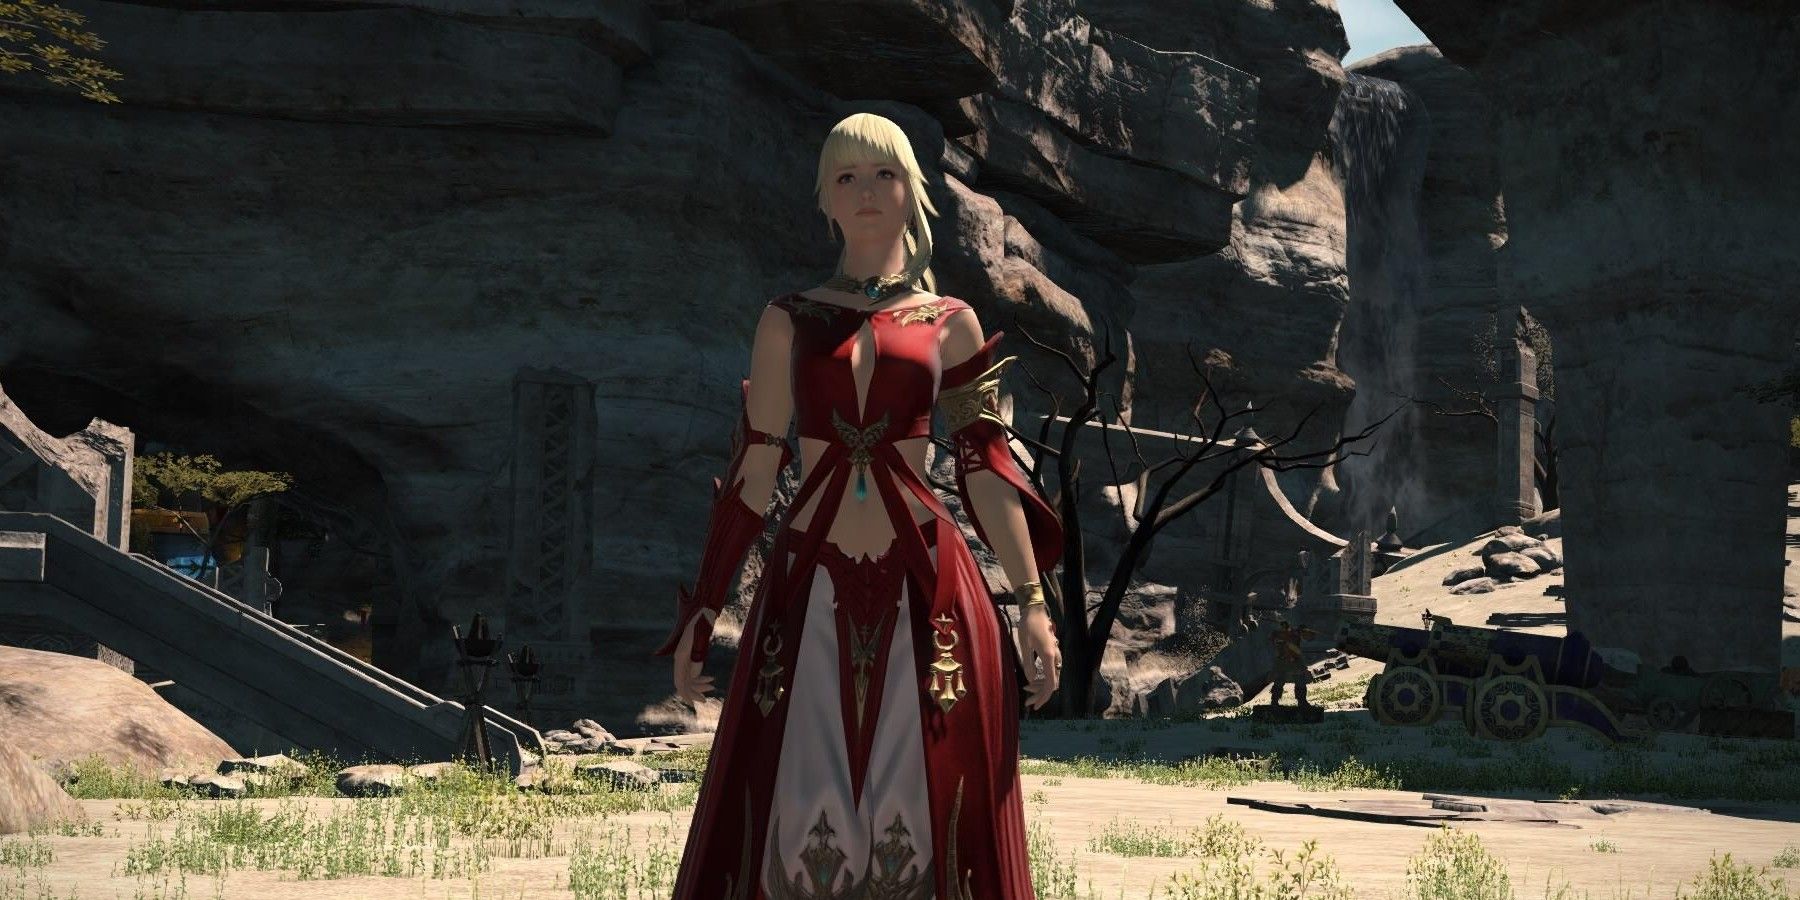 Lyse in her red outfit.